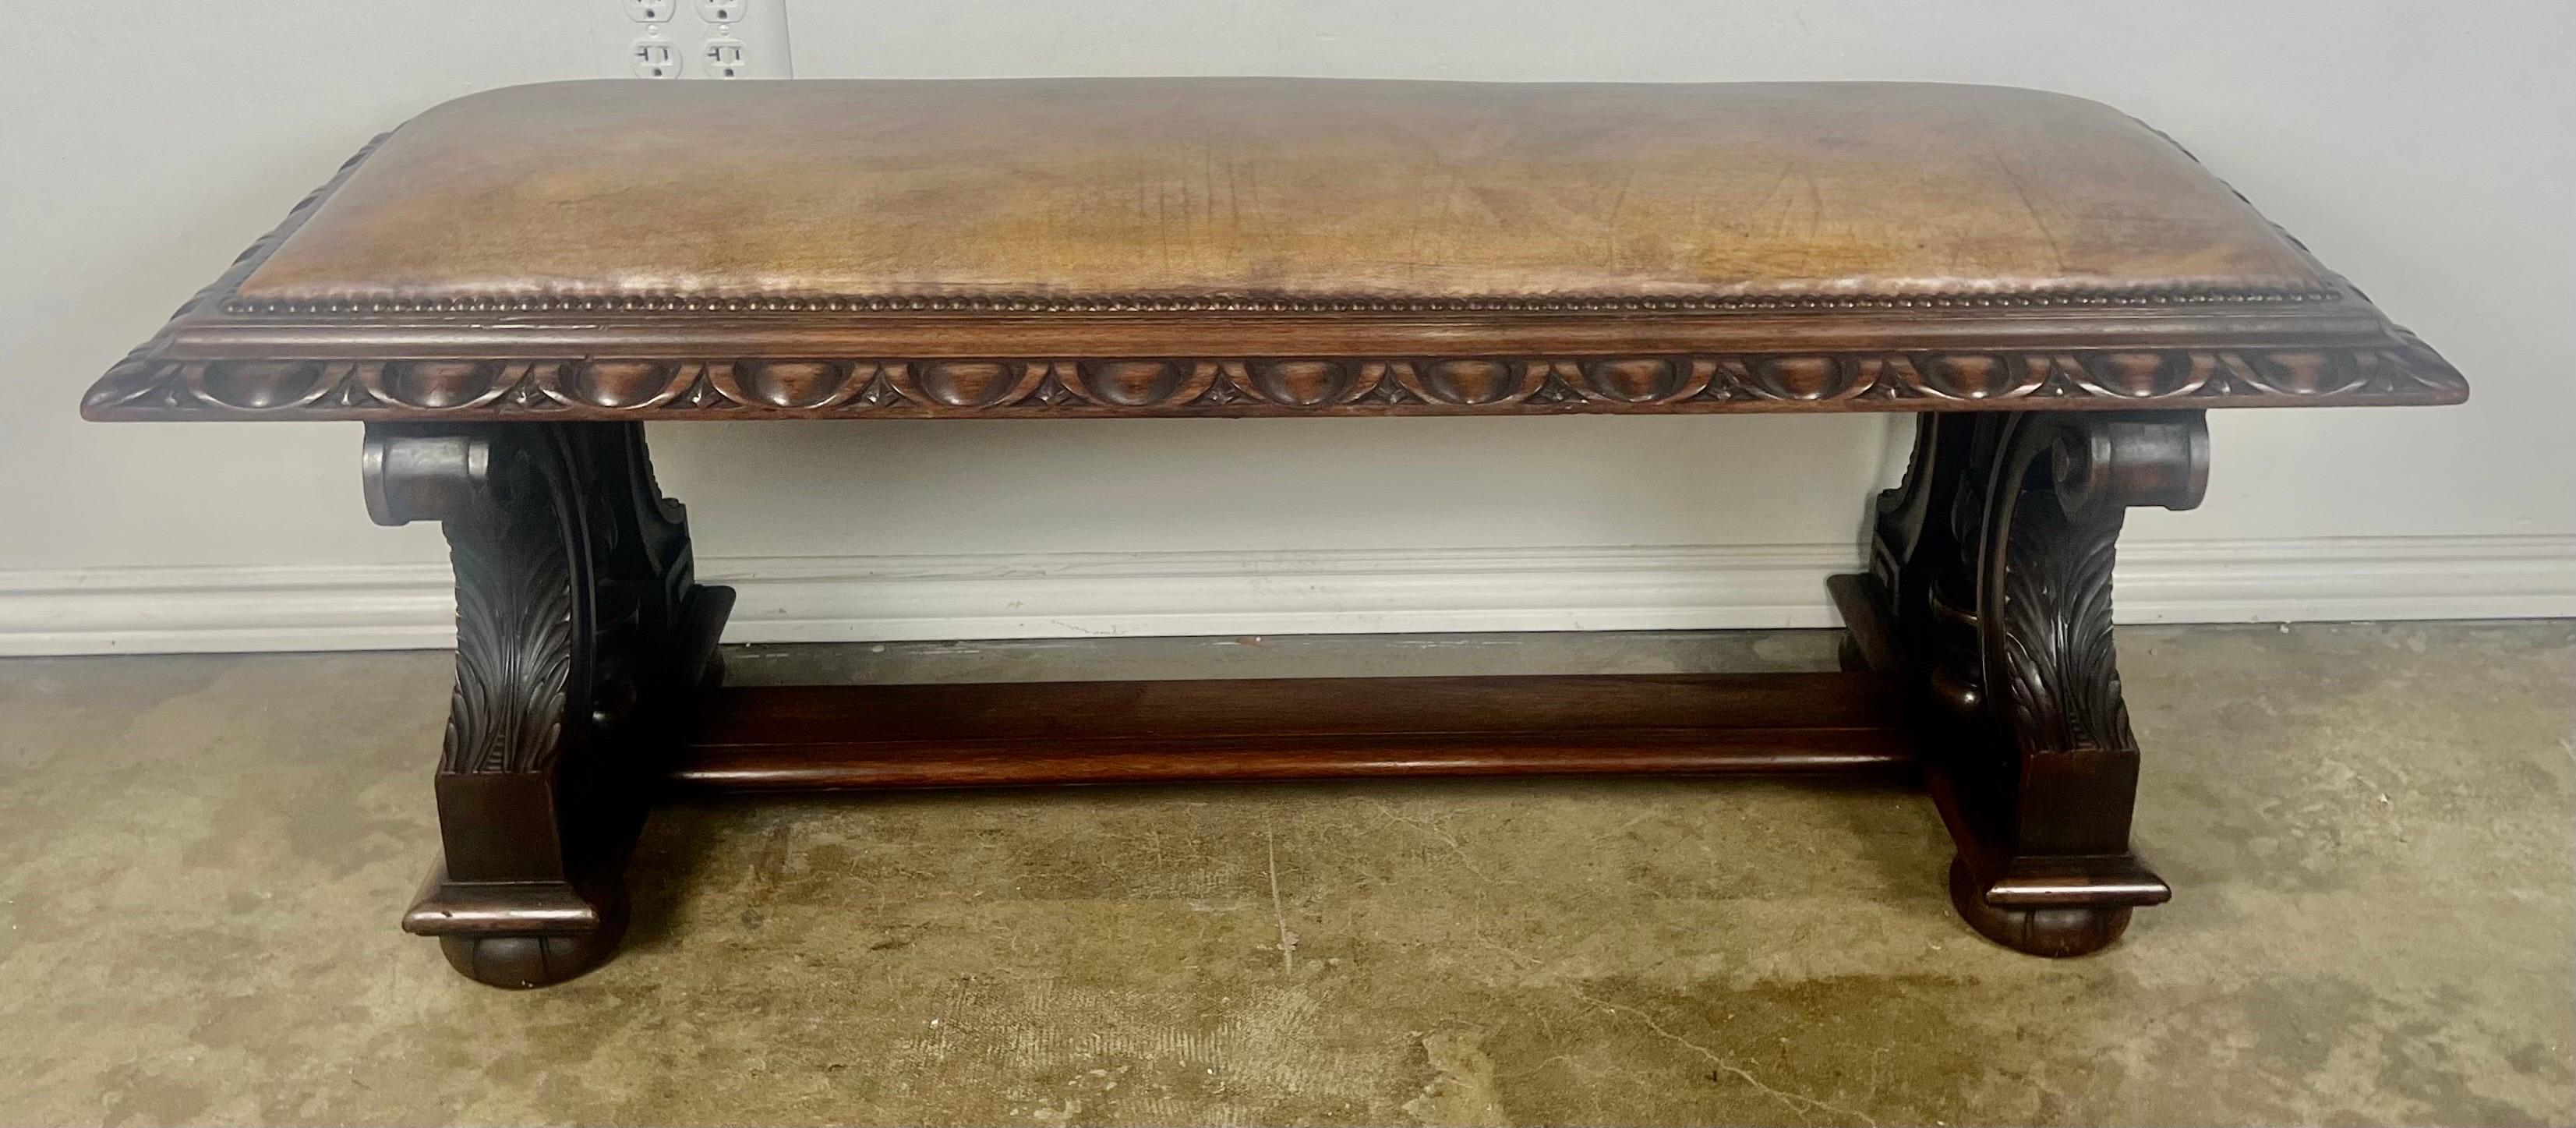 19th C. English Tutor style walnut bench with egg/dart detail.  The bench stands on four bun feet.  The handsome bench is covered in a rich leather with antique nailhead trim detail.